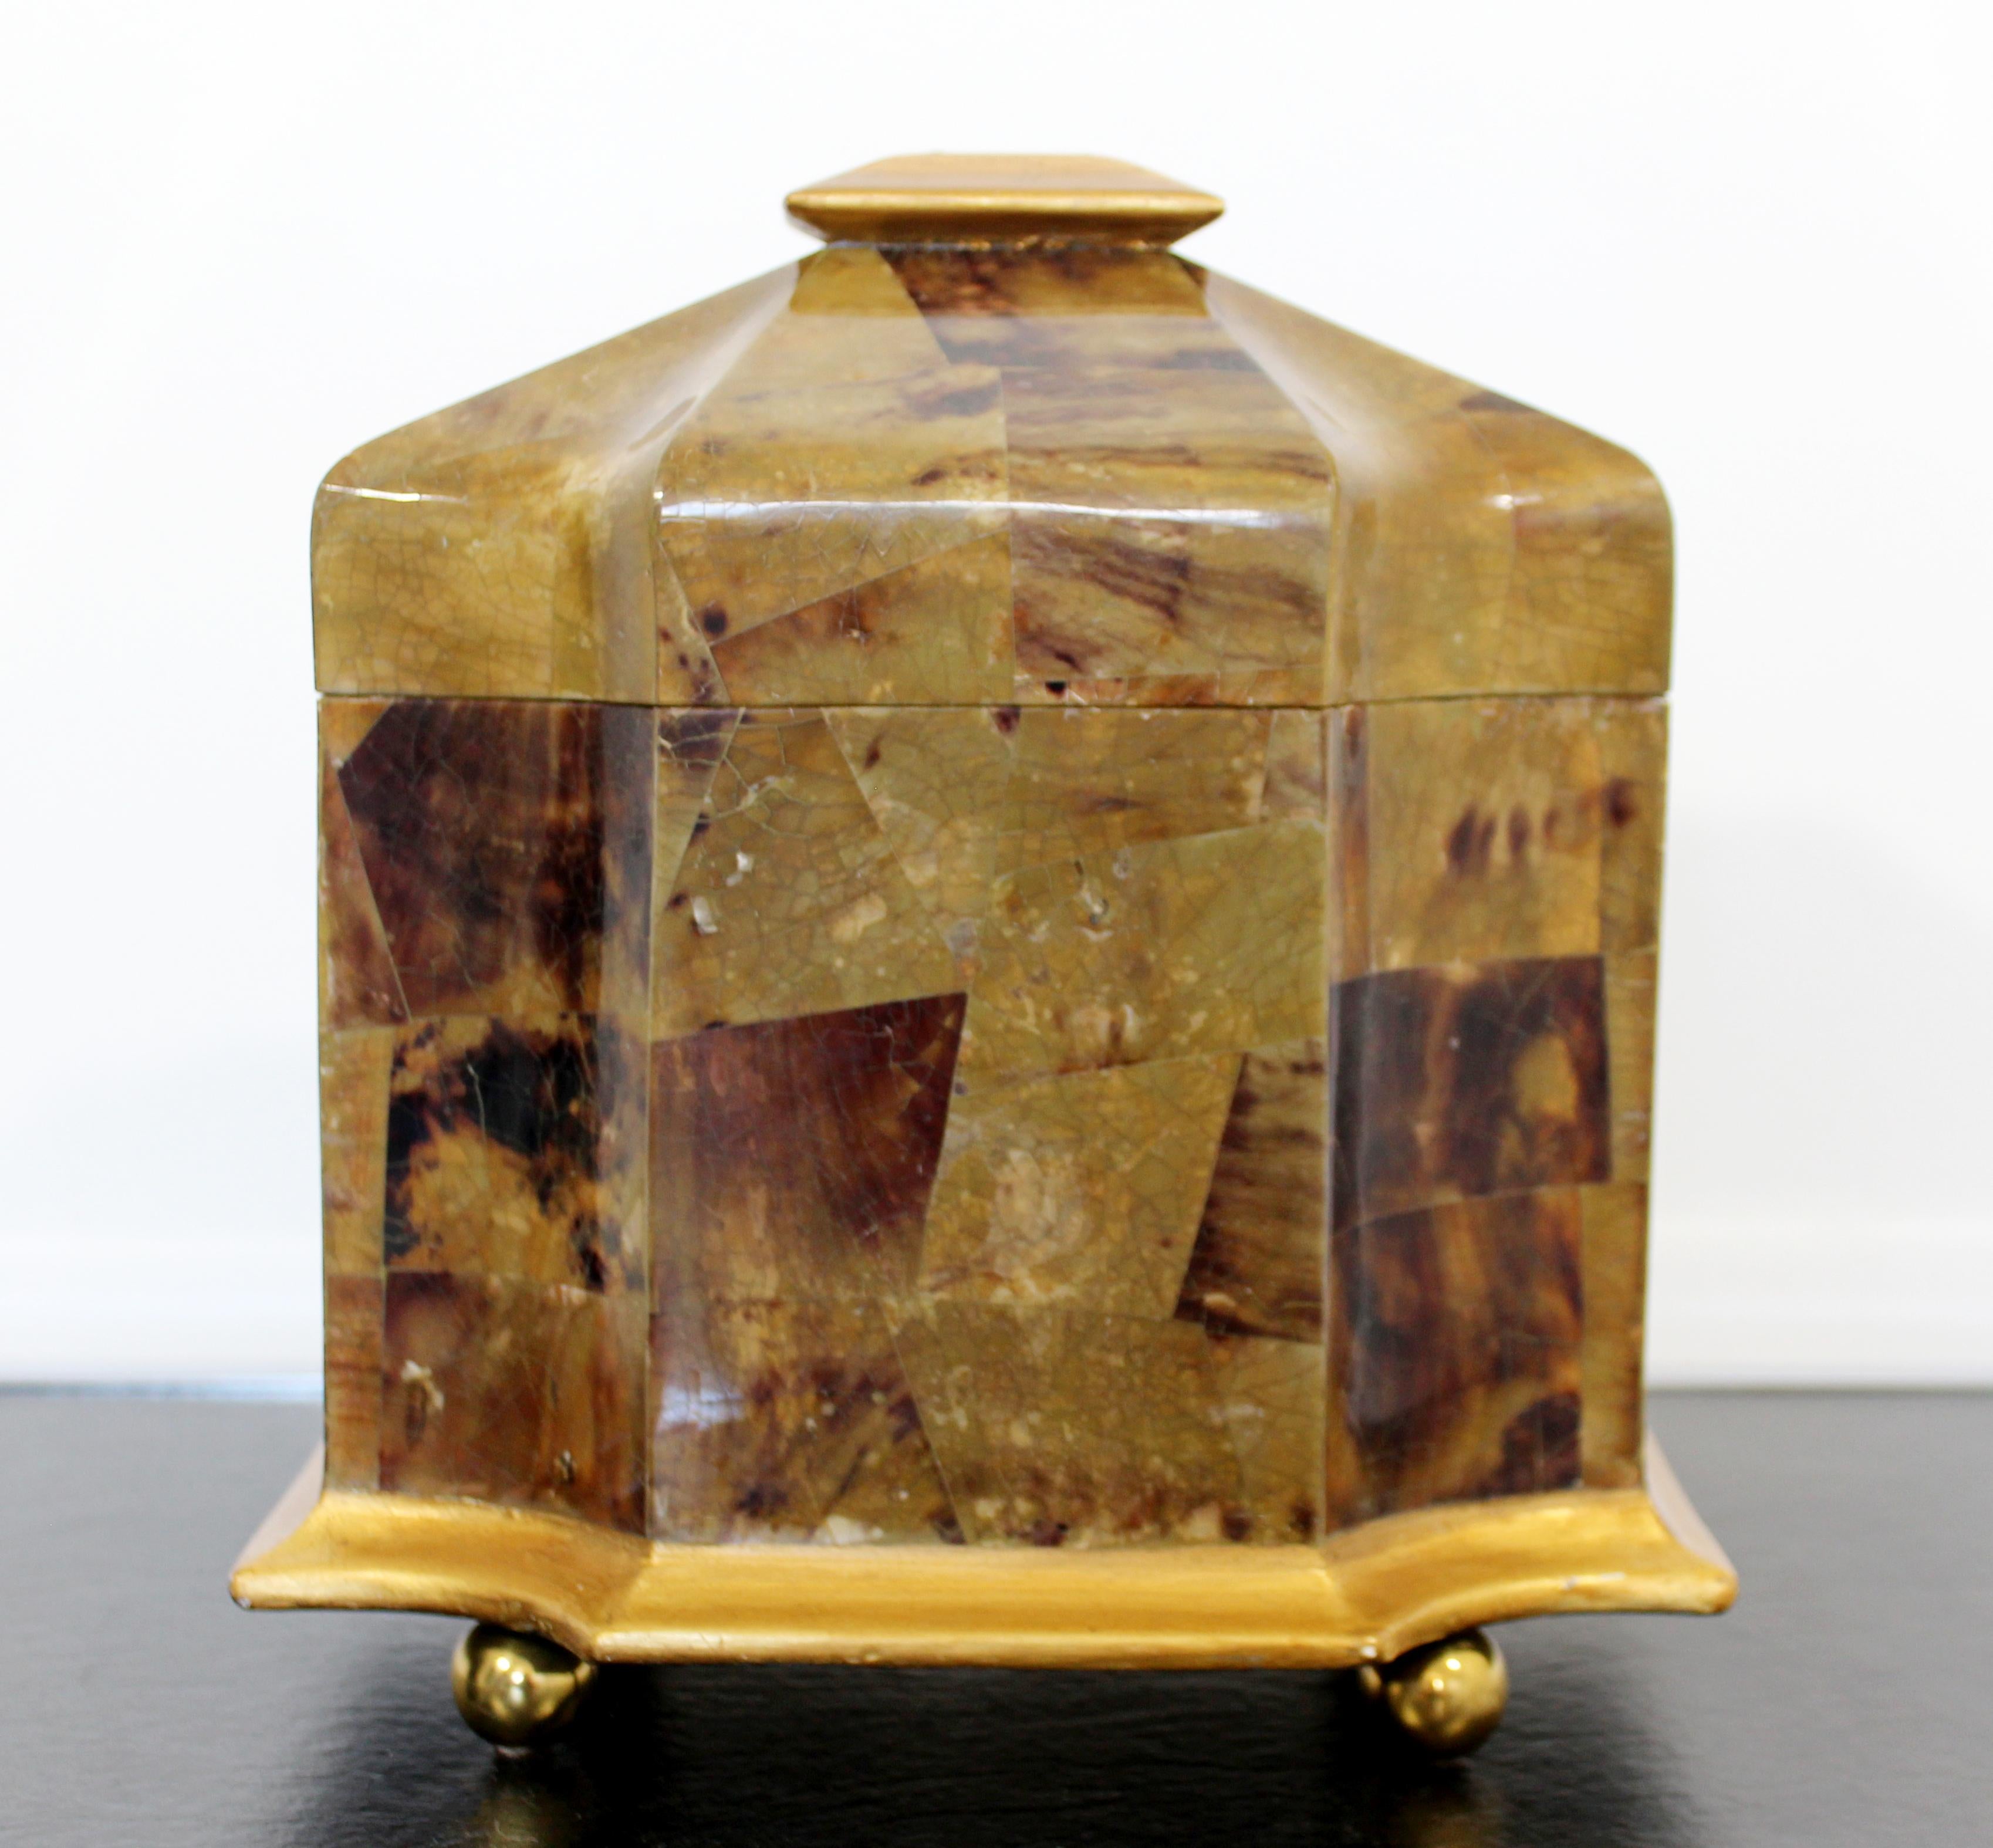 For your consideration is a marvelous, lidded box, made tessellated stone over wood and gilded wood, by Maitland Smith, circa 1970s. In very good vintage condition. The dimensions are 10